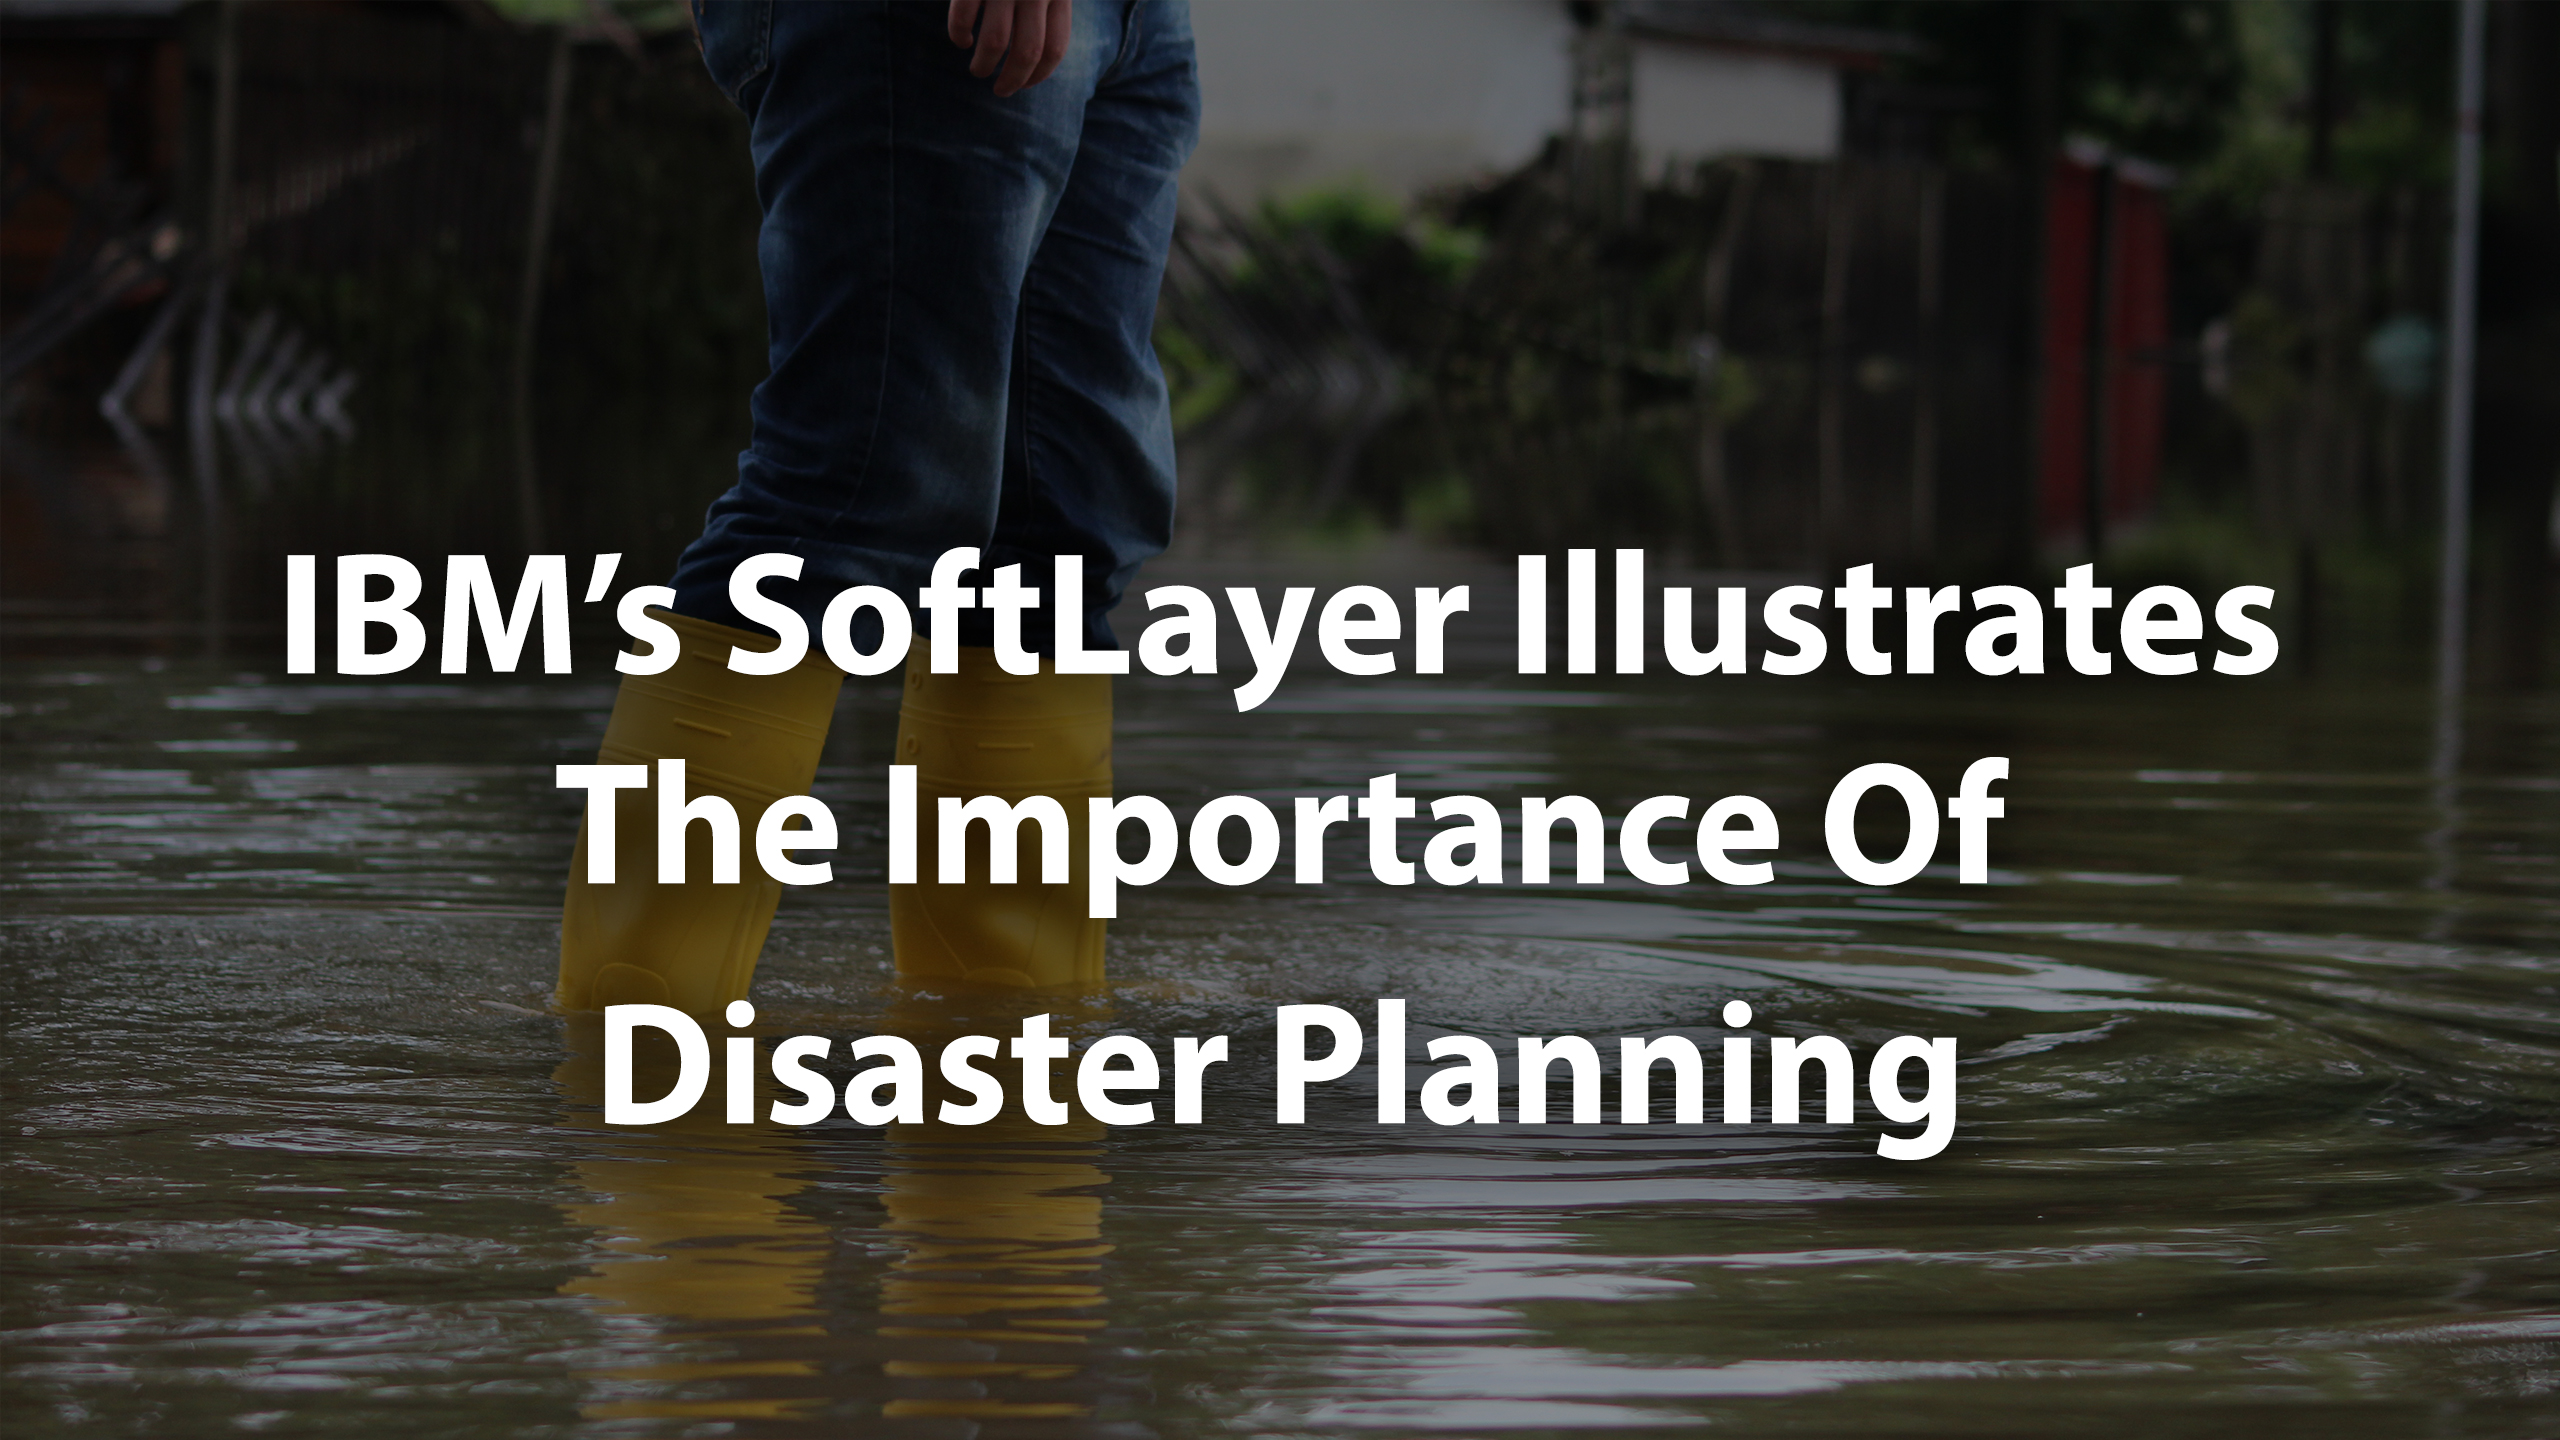 IBM’s SoftLayer Illustrates The Importance Of Disaster Planning